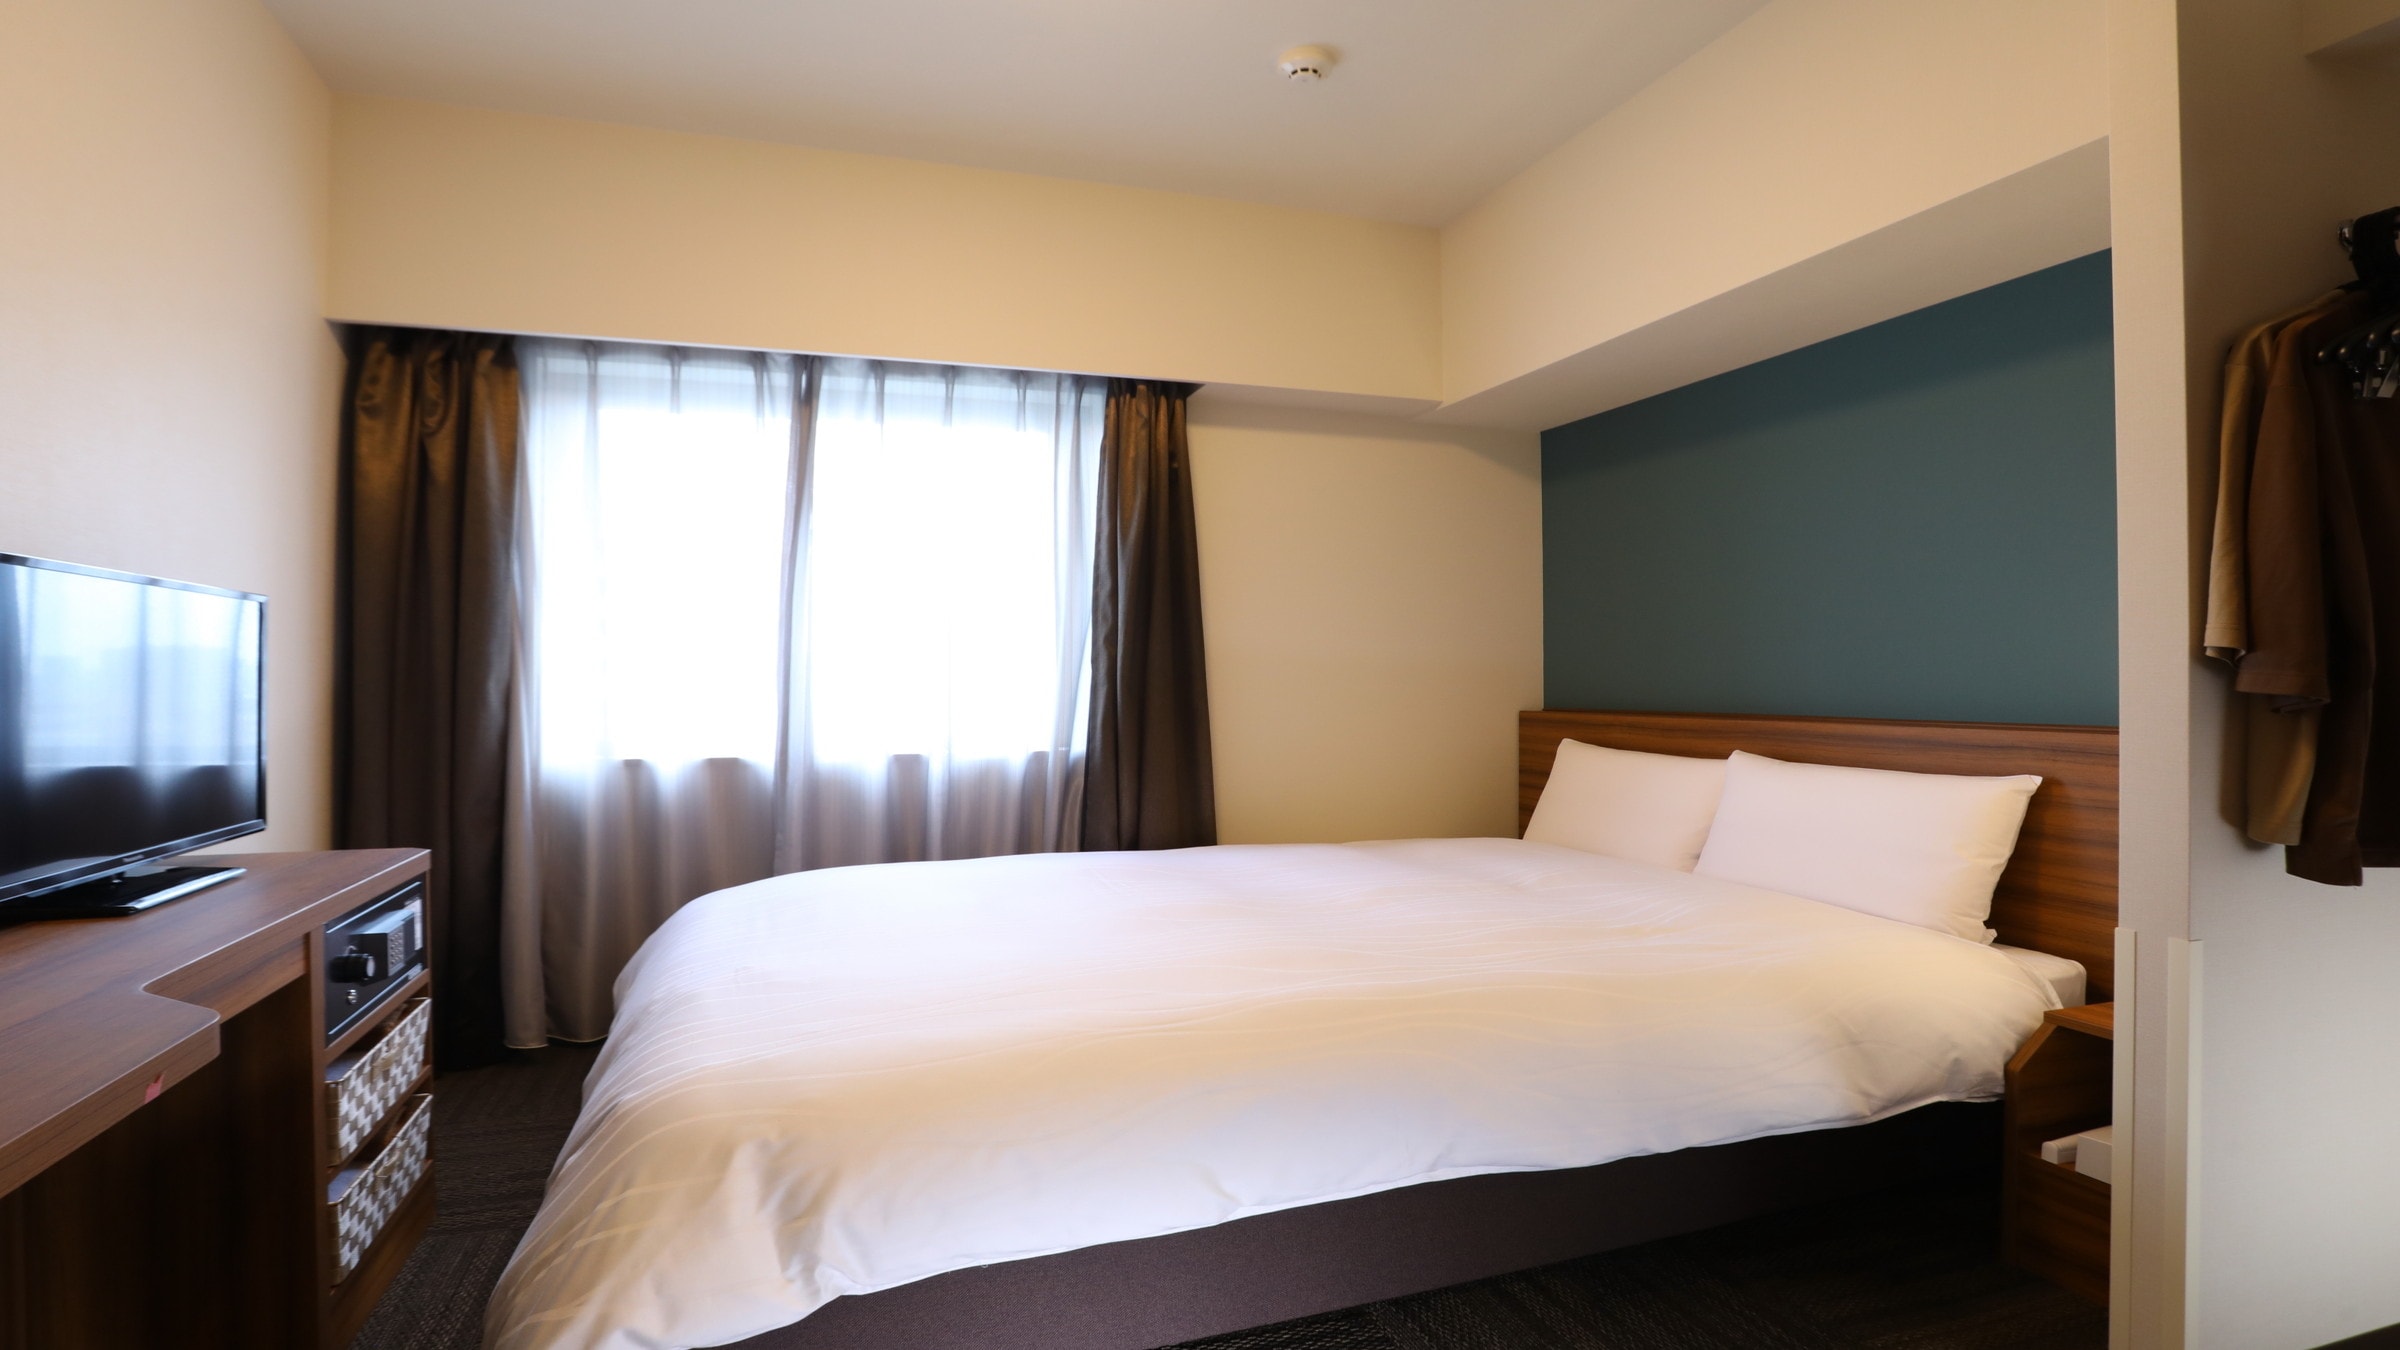 ◆ Standard double room ◆ [Non-smoking] 13.9 ~ 14.5㎡ Bed size 140 & times; 195cm